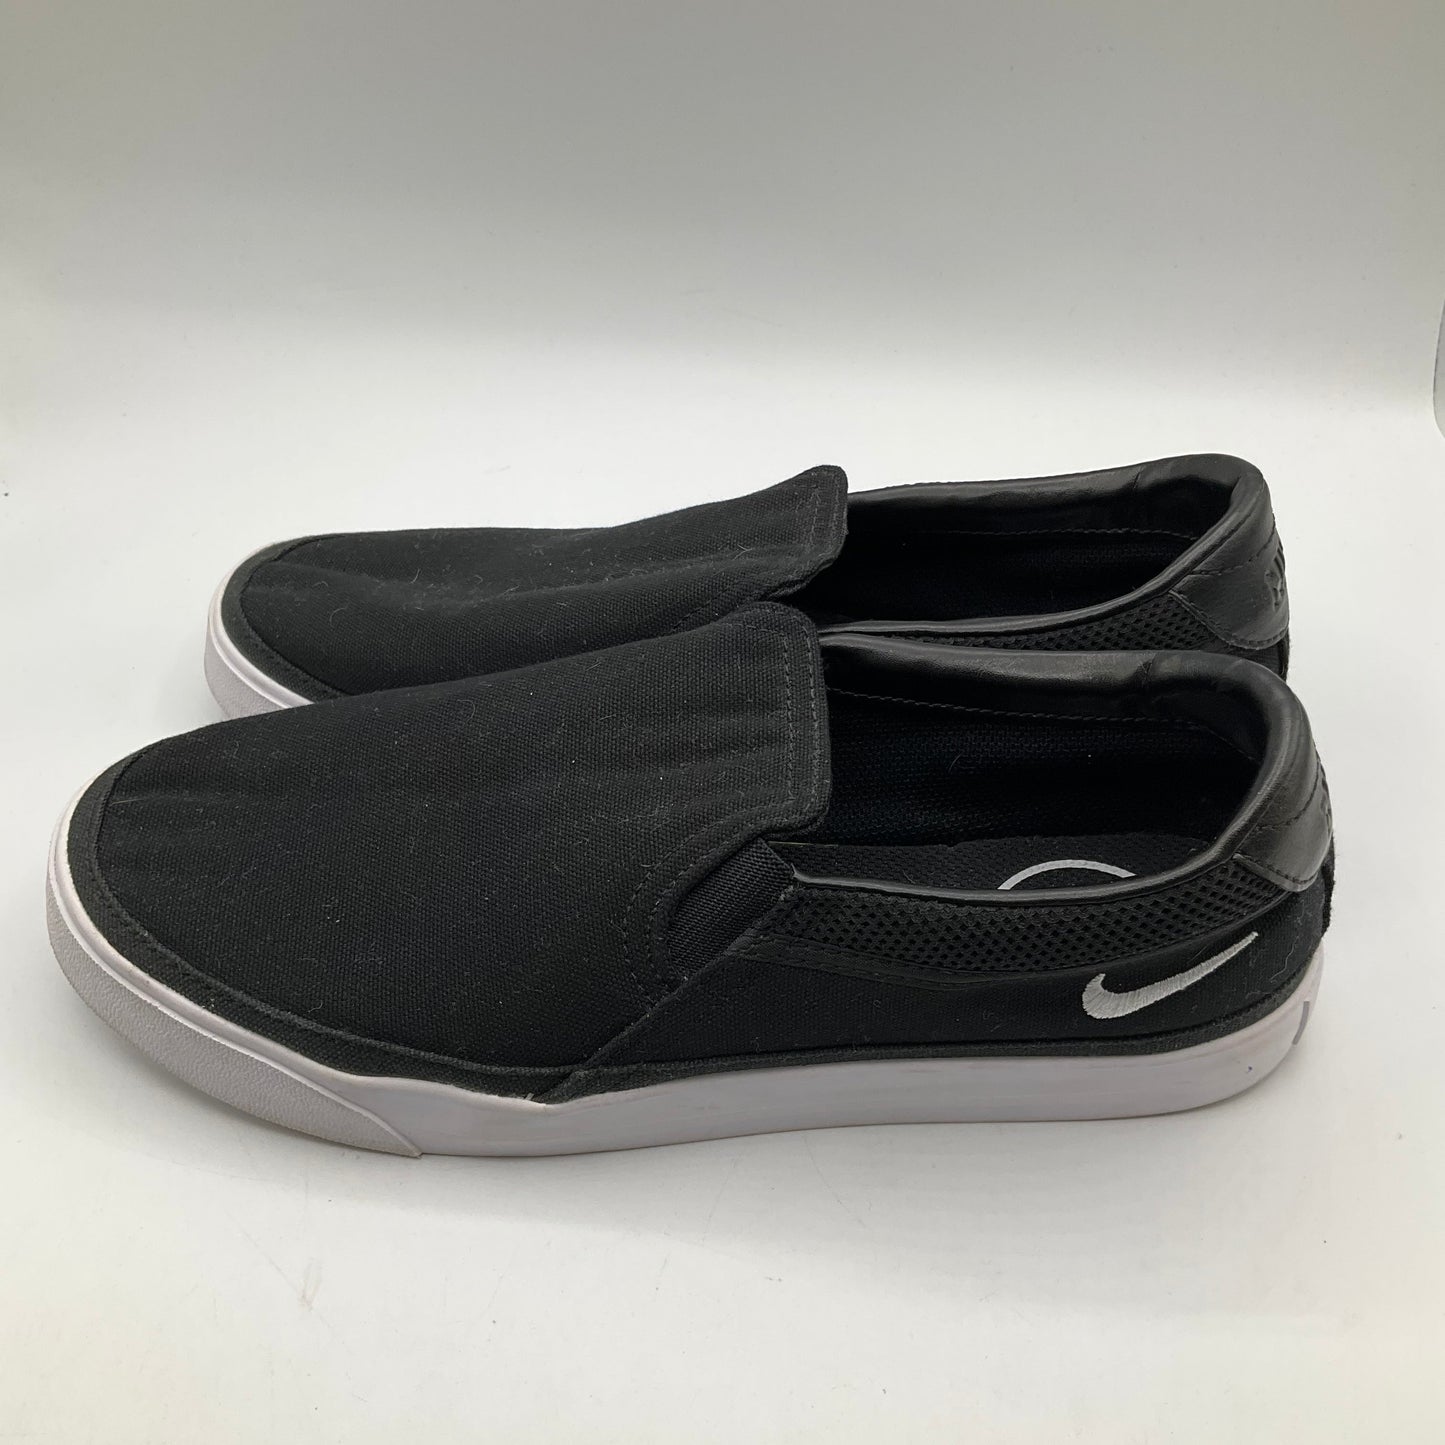 Shoes Flats By Nike  Size: 10